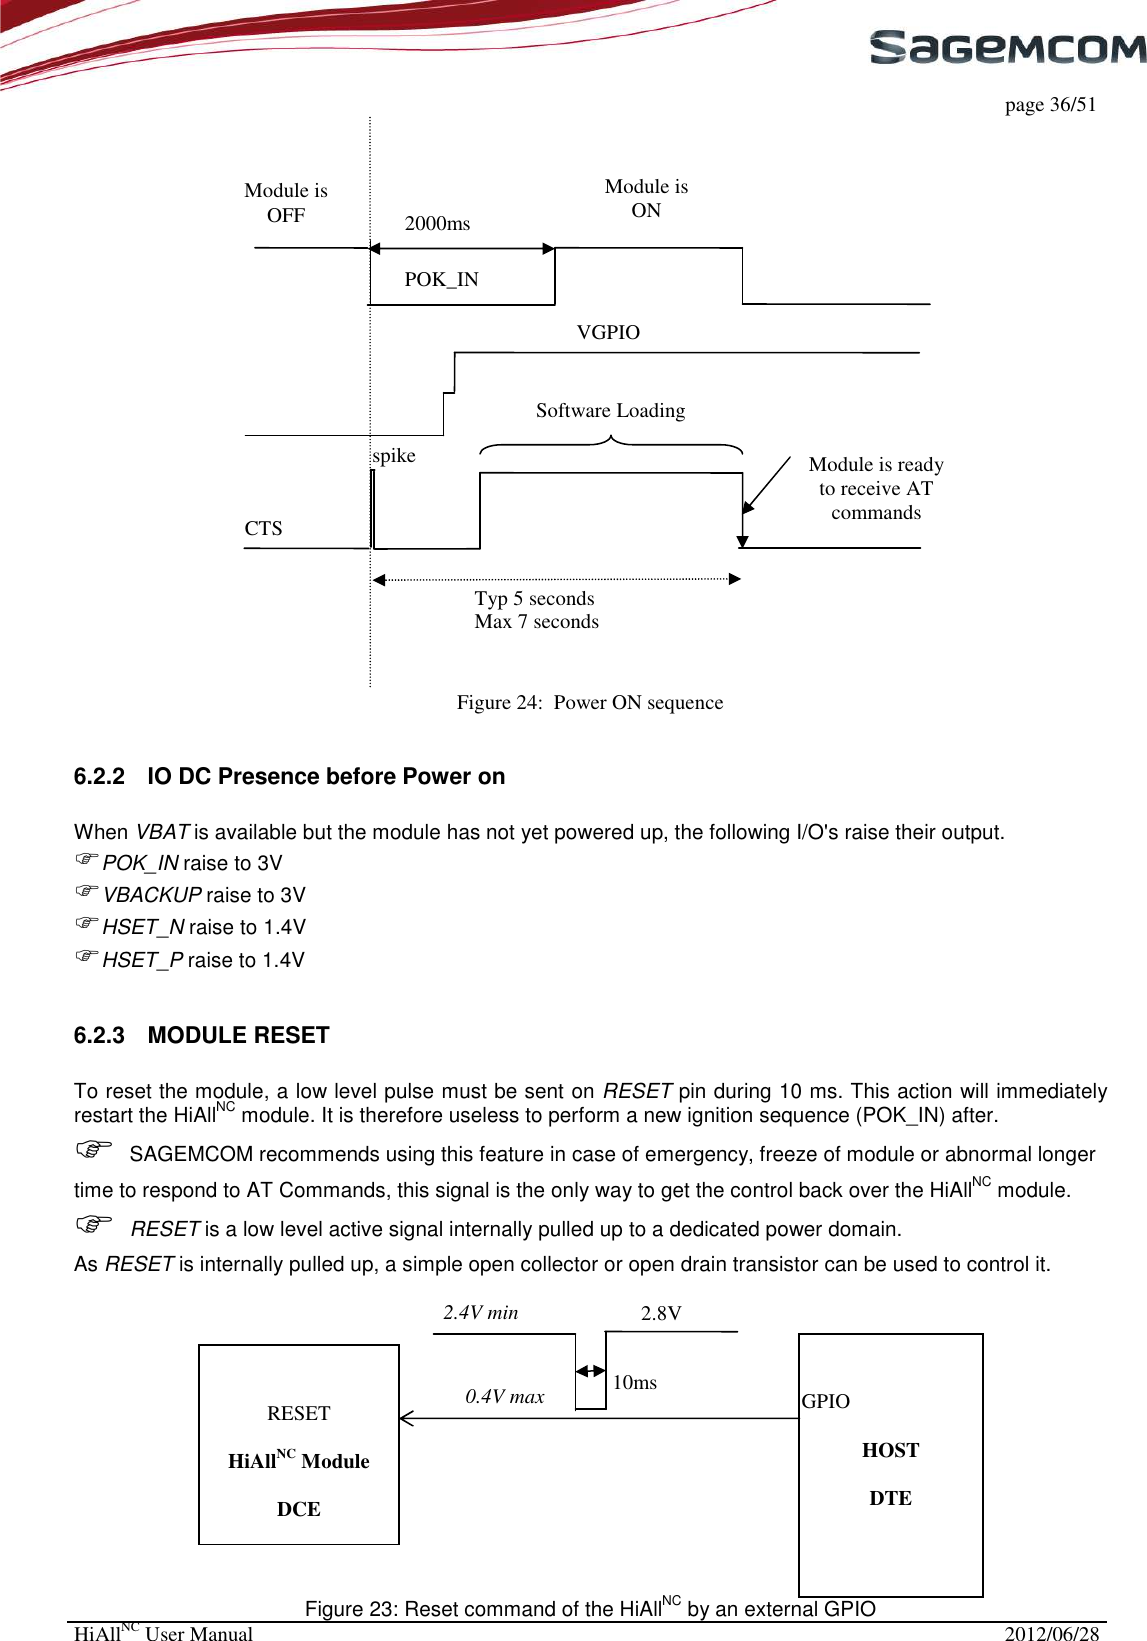     page 36/51 HiAllNC User Manual  2012/06/28   Figure 24:  Power ON sequence  6.2.2  IO DC Presence before Power on  When VBAT is available but the module has not yet powered up, the following I/O&apos;s raise their output.  POK_IN raise to 3V VBACKUP raise to 3V HSET_N raise to 1.4V HSET_P raise to 1.4V  6.2.3  MODULE RESET   To reset the module, a low level pulse must be sent on RESET pin during 10 ms. This action will immediately restart the HiAllNC module. It is therefore useless to perform a new ignition sequence (POK_IN) after.  SAGEMCOM recommends using this feature in case of emergency, freeze of module or abnormal longer time to respond to AT Commands, this signal is the only way to get the control back over the HiAllNC module.  RESET is a low level active signal internally pulled up to a dedicated power domain. As RESET is internally pulled up, a simple open collector or open drain transistor can be used to control it.   Figure 23: Reset command of the HiAllNC by an external GPIO     HiAllNC Module  DCE     HOST  DTE RESET 10ms 2.4V min 0.4V max GPIO 2.8V POK_IN VGPIO spike Software Loading Module is ready to receive AT commands Module is OFF Module is ON 2000ms CTS Typ 5 seconds Max 7 seconds 